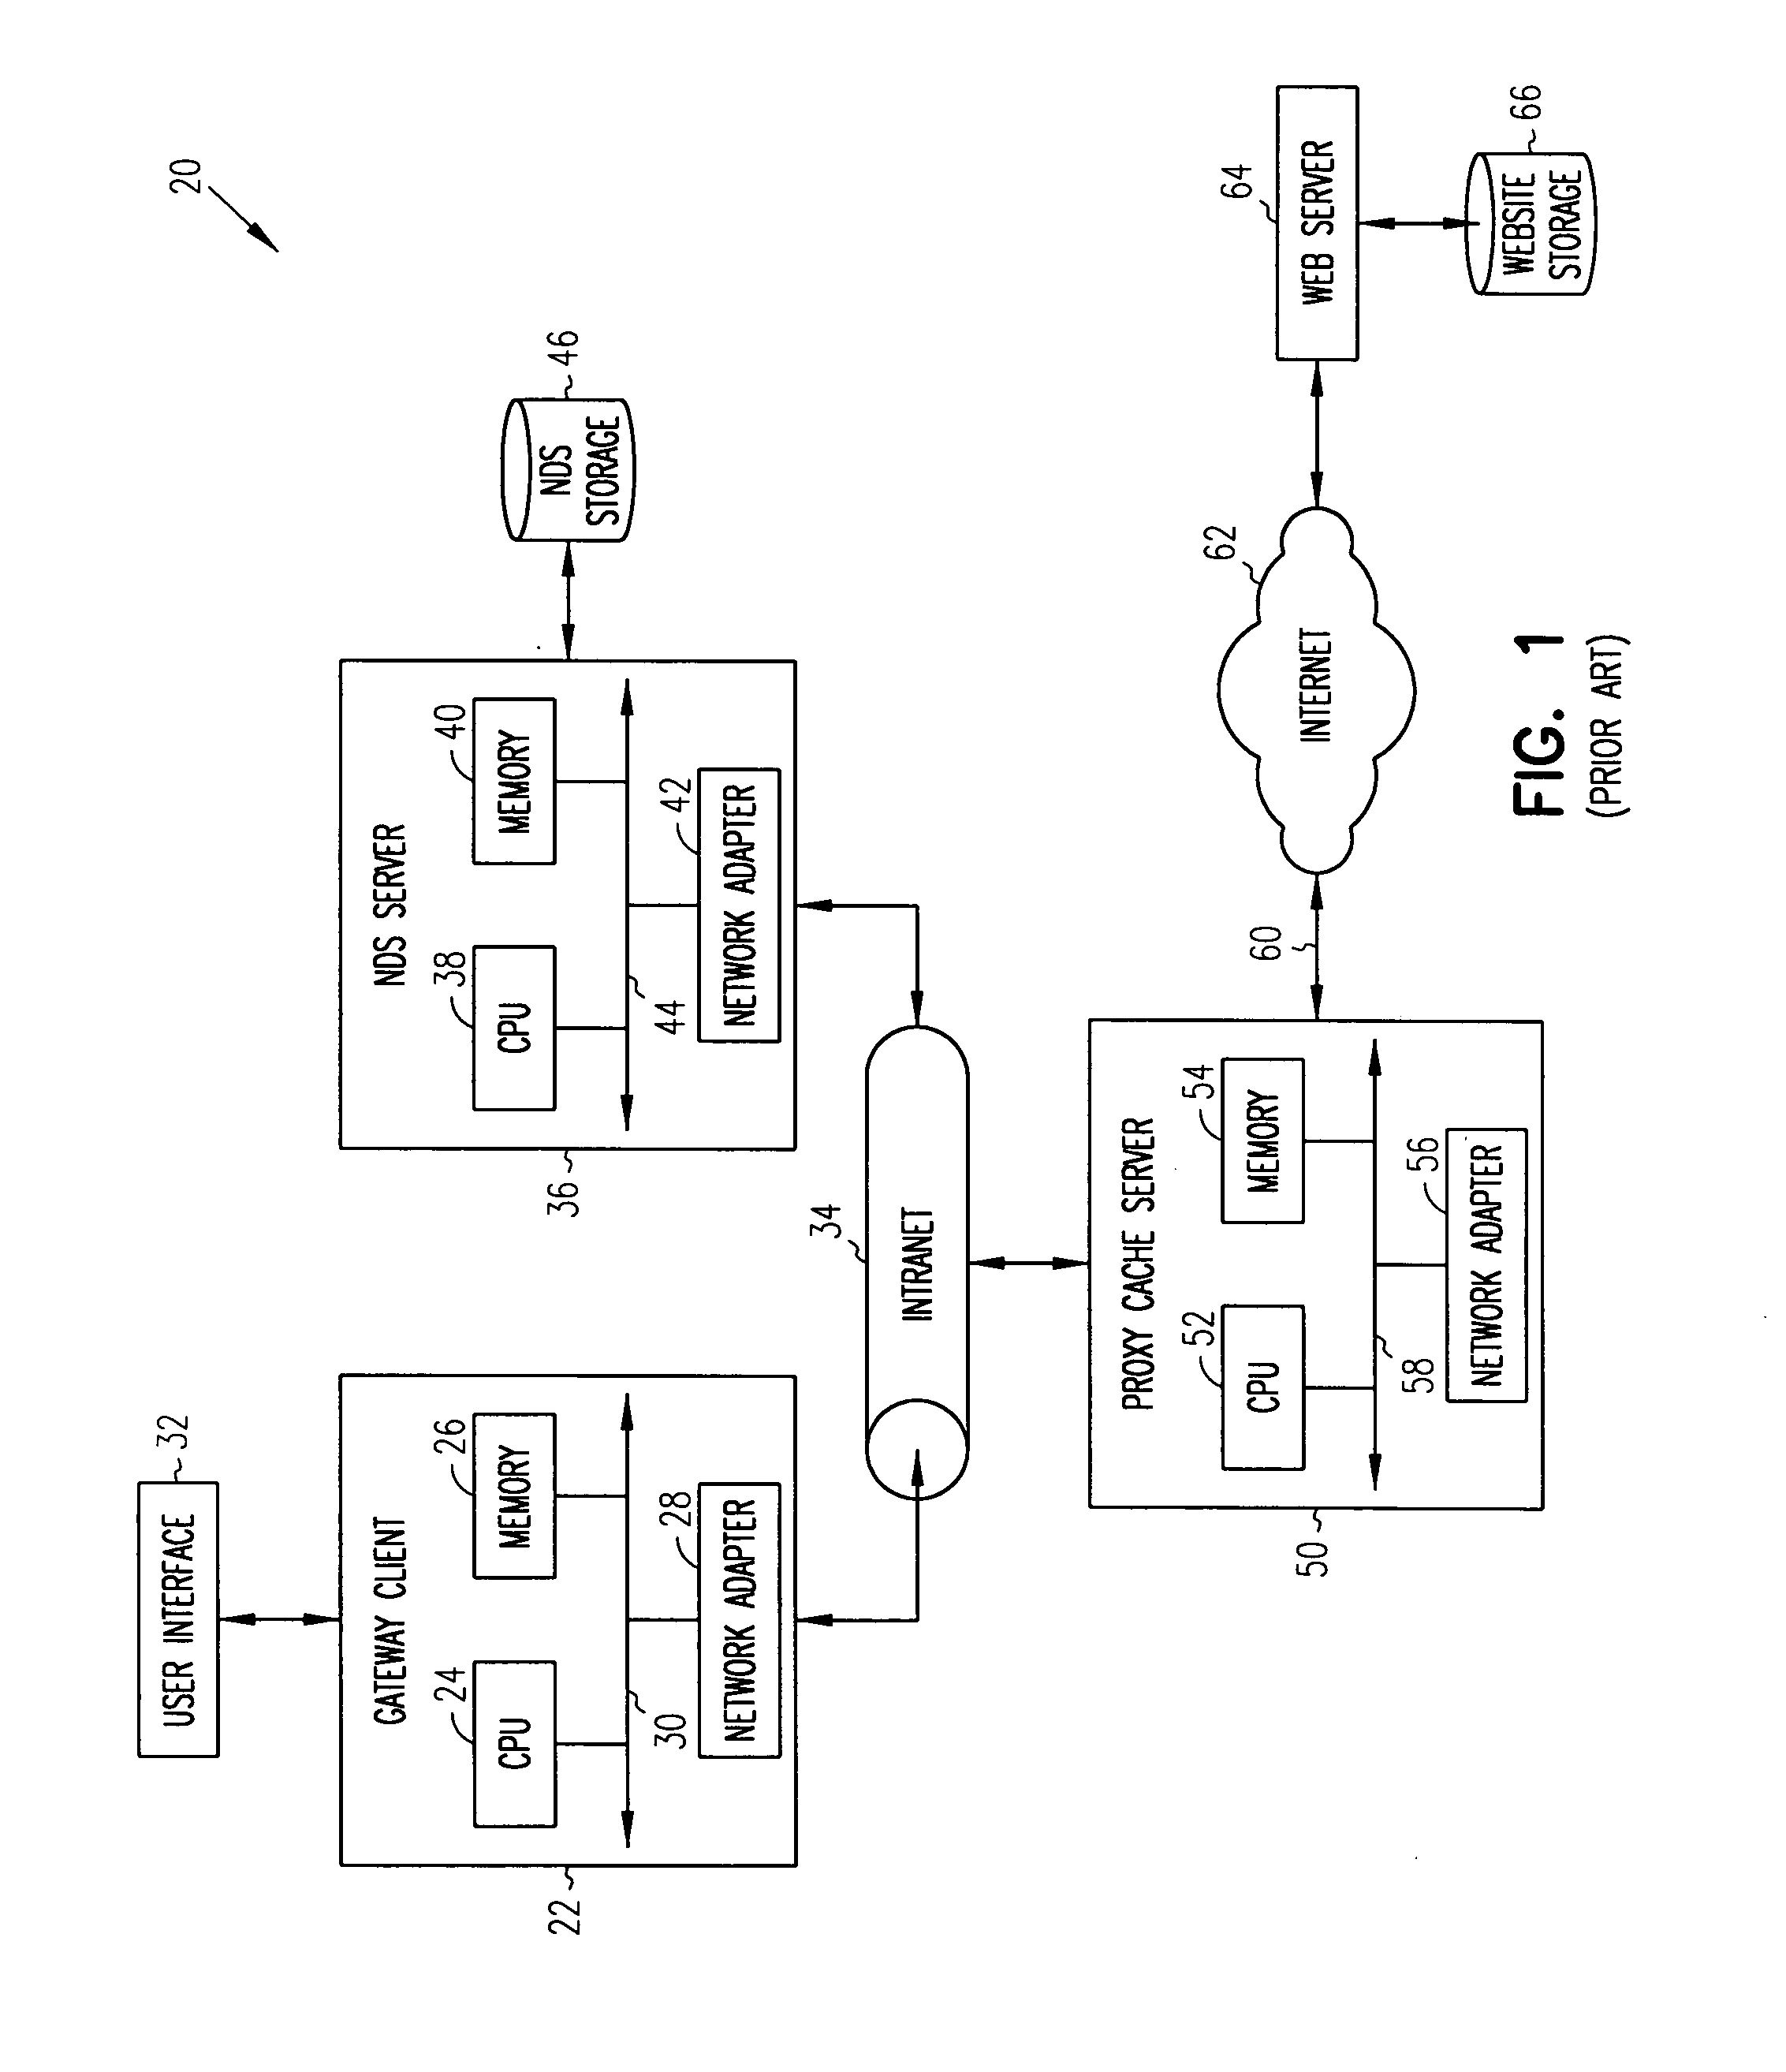 System and method for filtering of web-based content stored on a proxy cache server